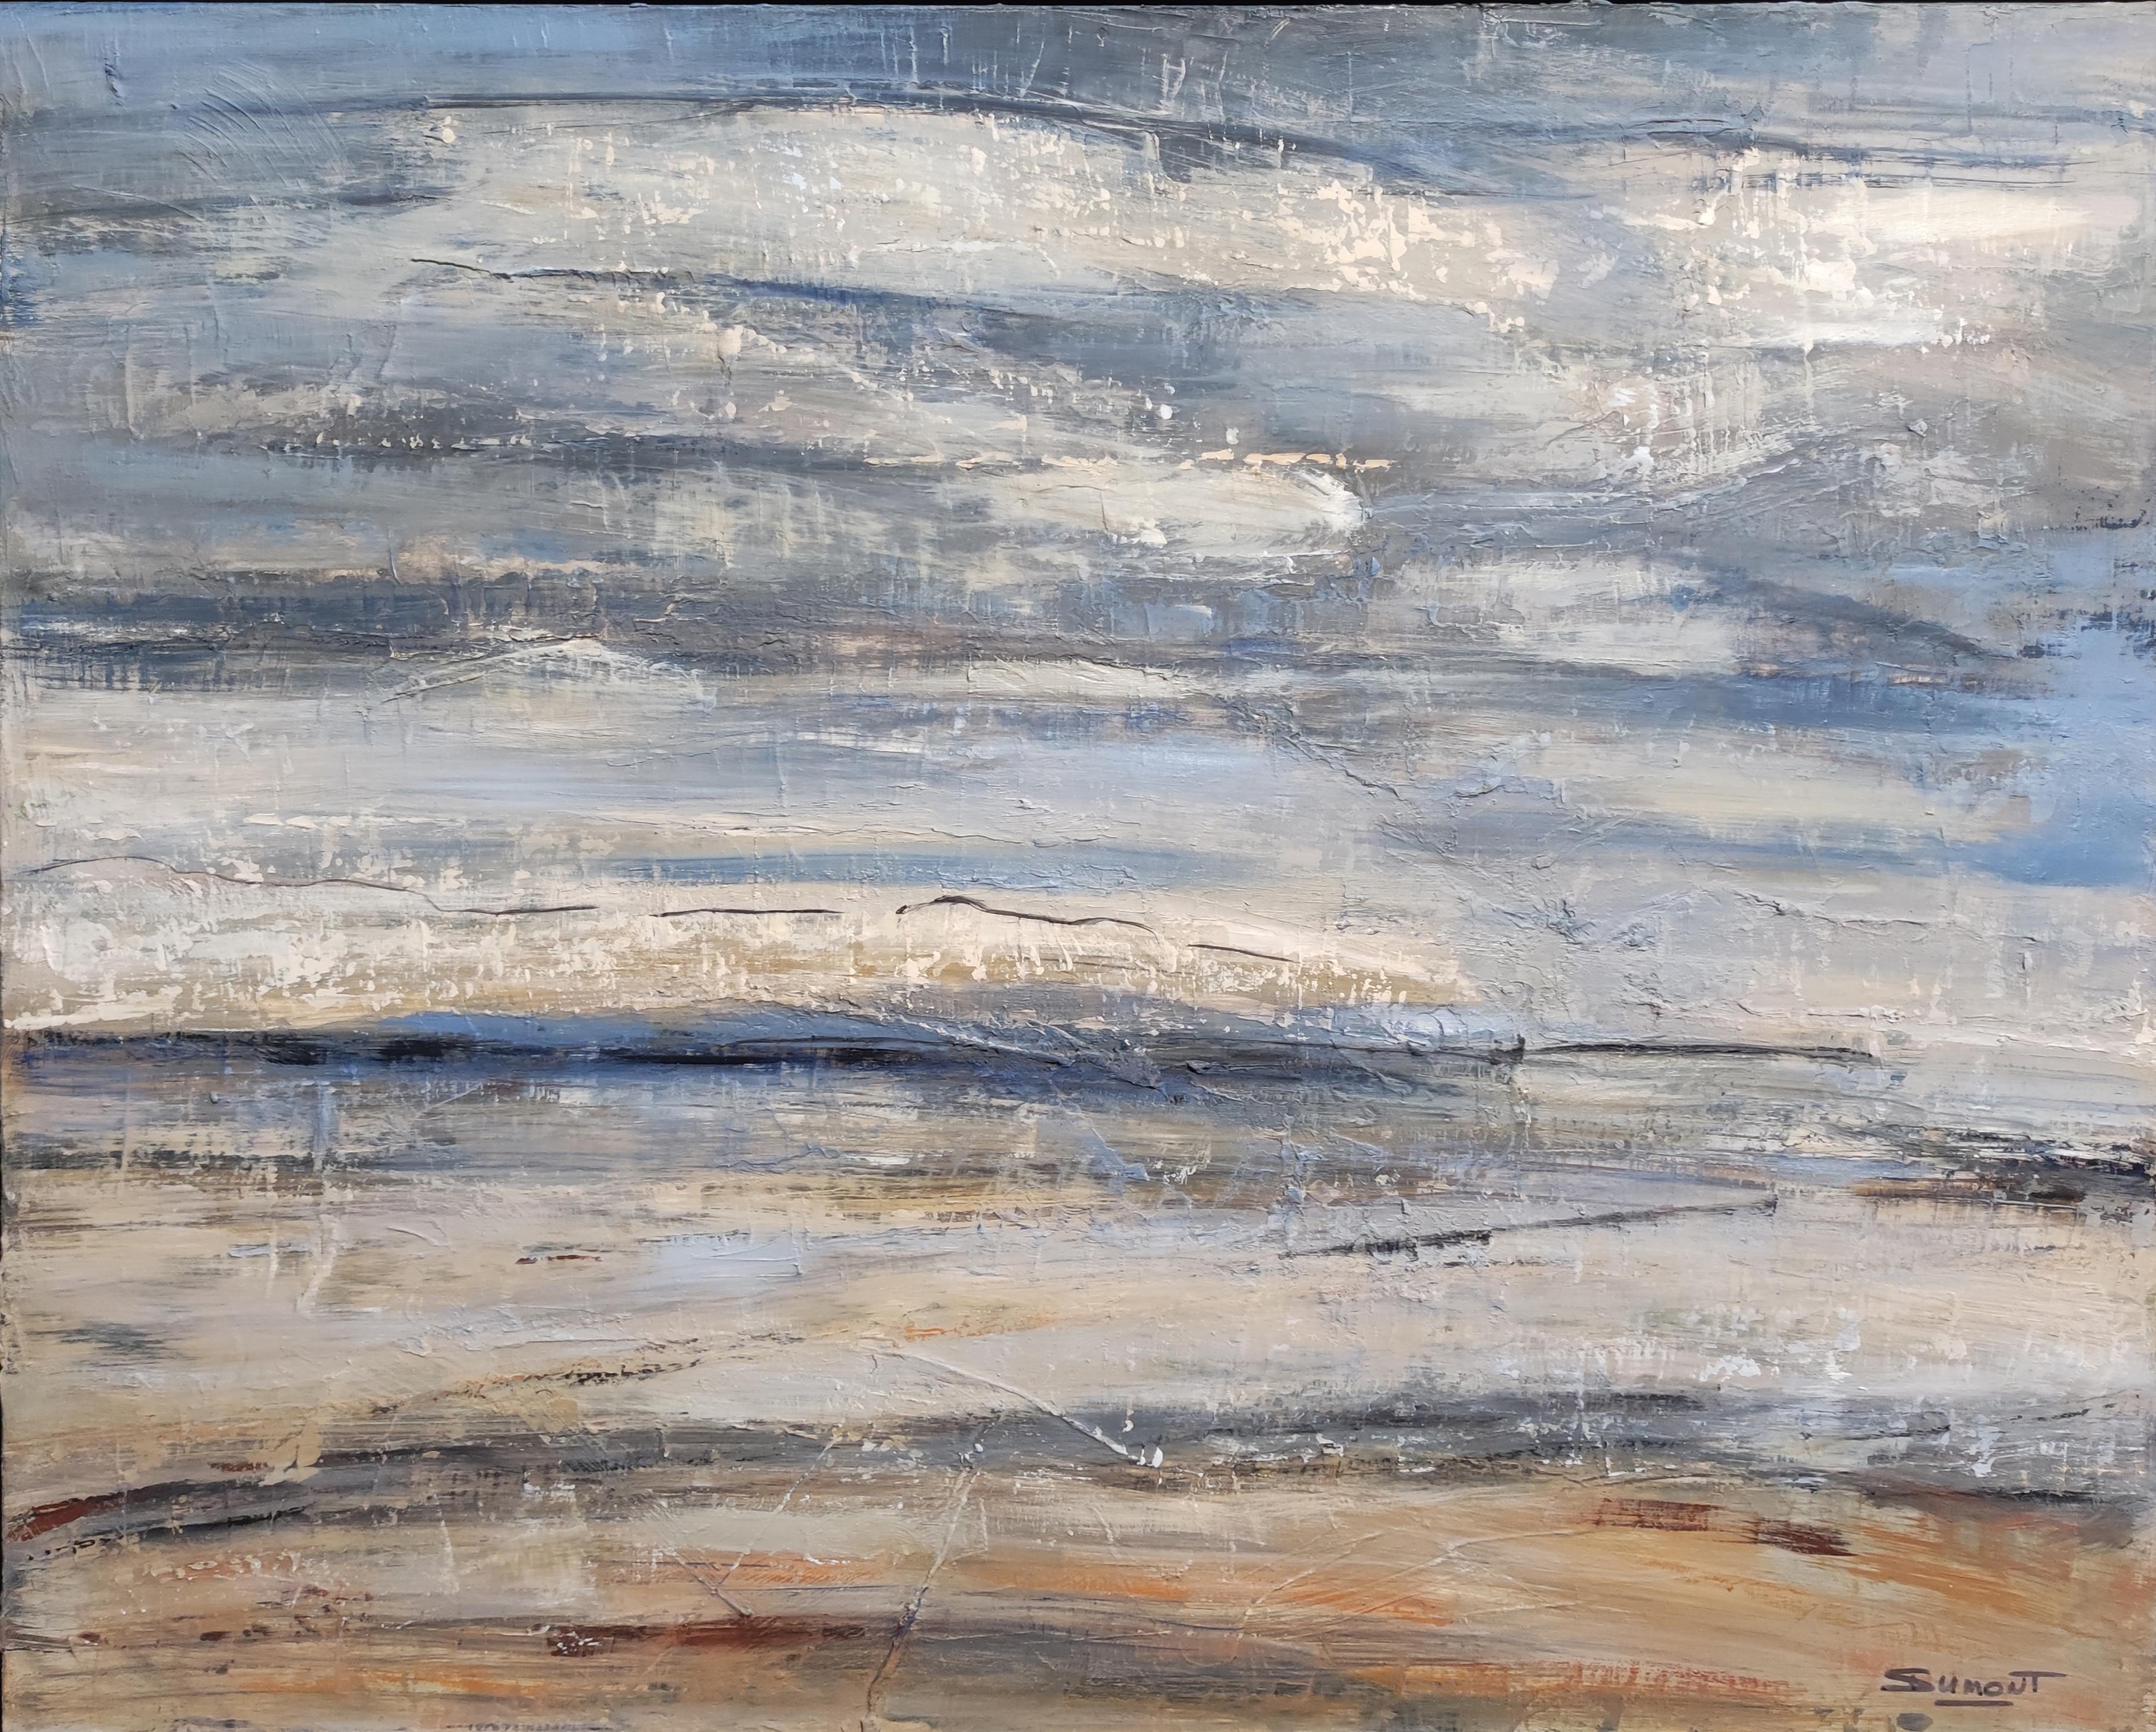 Seascape, Blue Seaside, Oil on canvas, Sky, Impressionism Abstract Expressionism - Painting by SOPHIE DUMONT